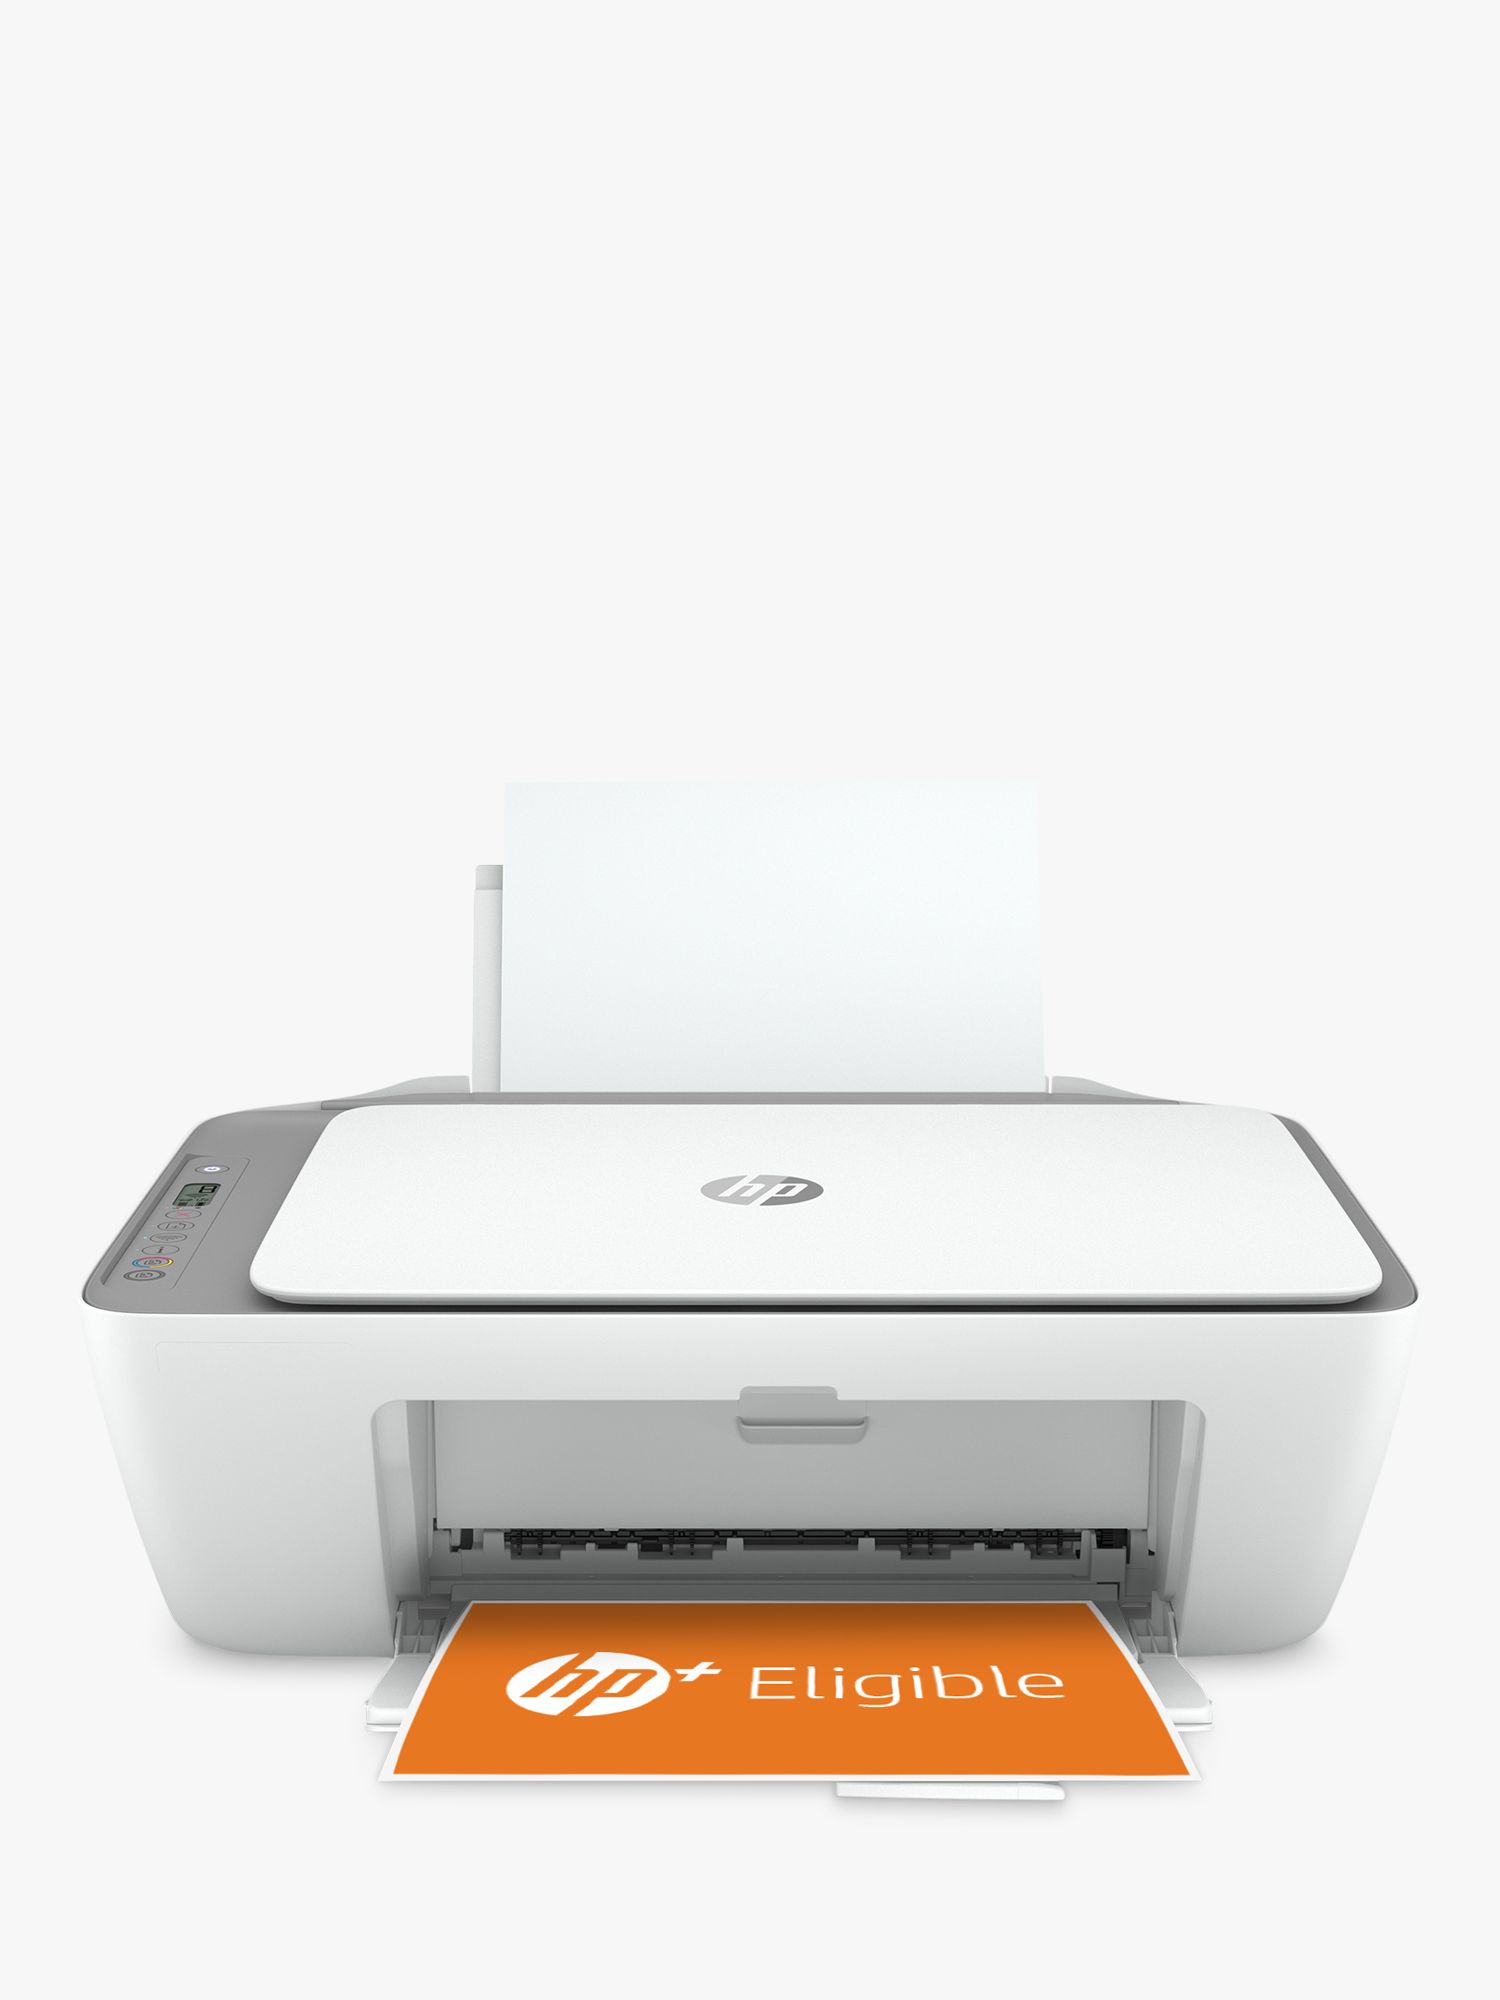 How To Print, Scan, Copy With HP Deskjet 2700 All-In-One Printer, review !!  